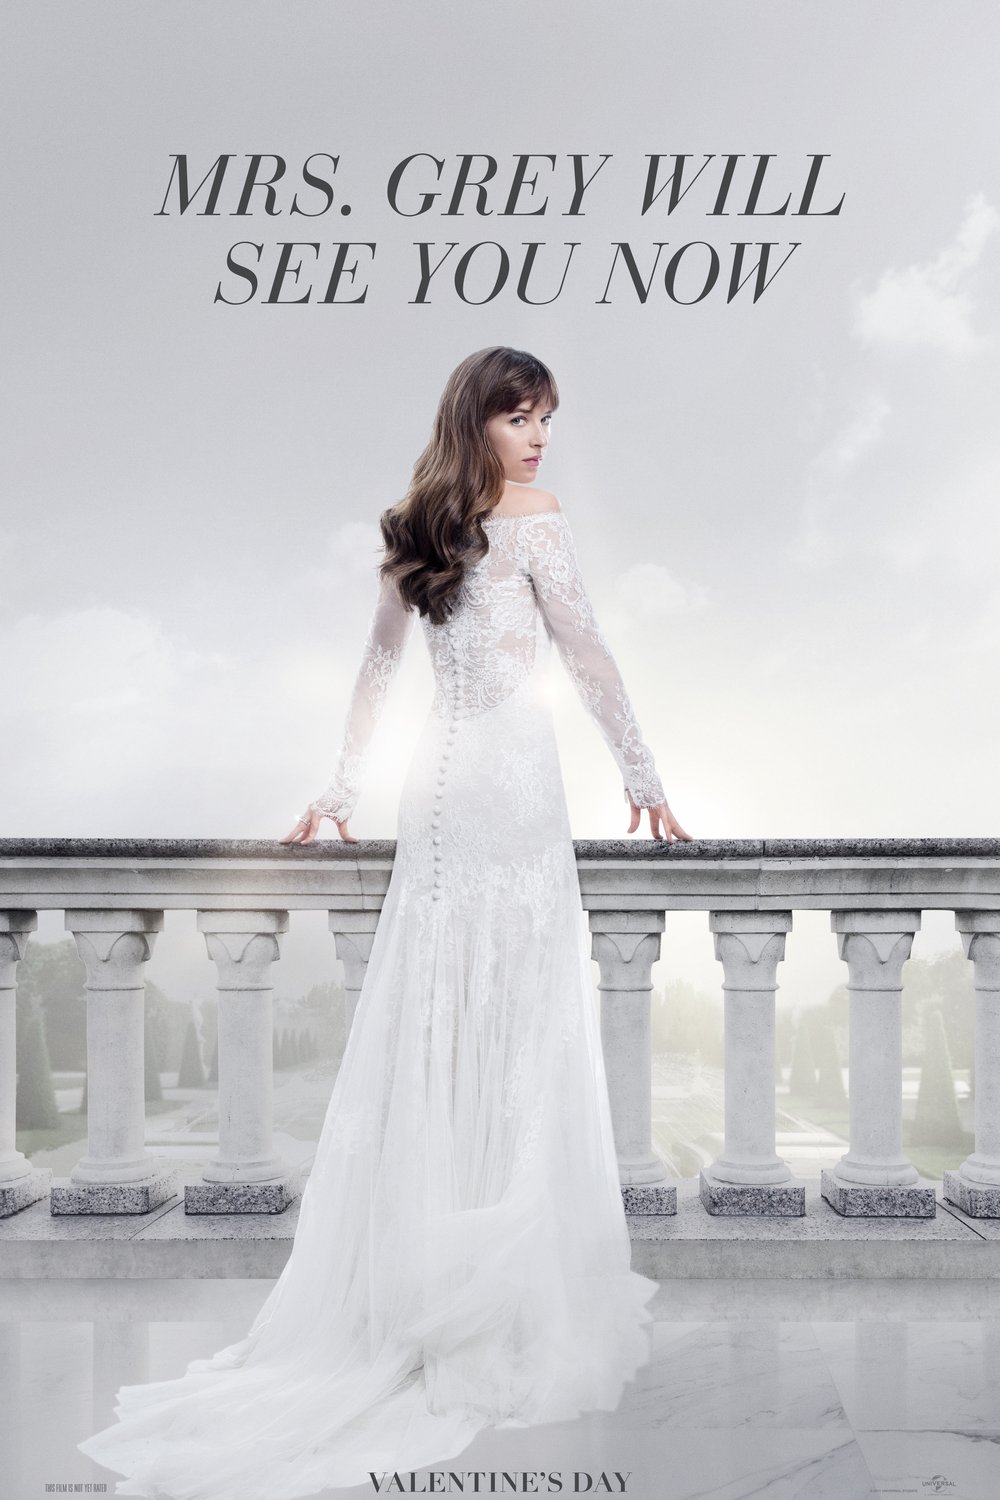 Poster of the movie Fifty Shades Freed